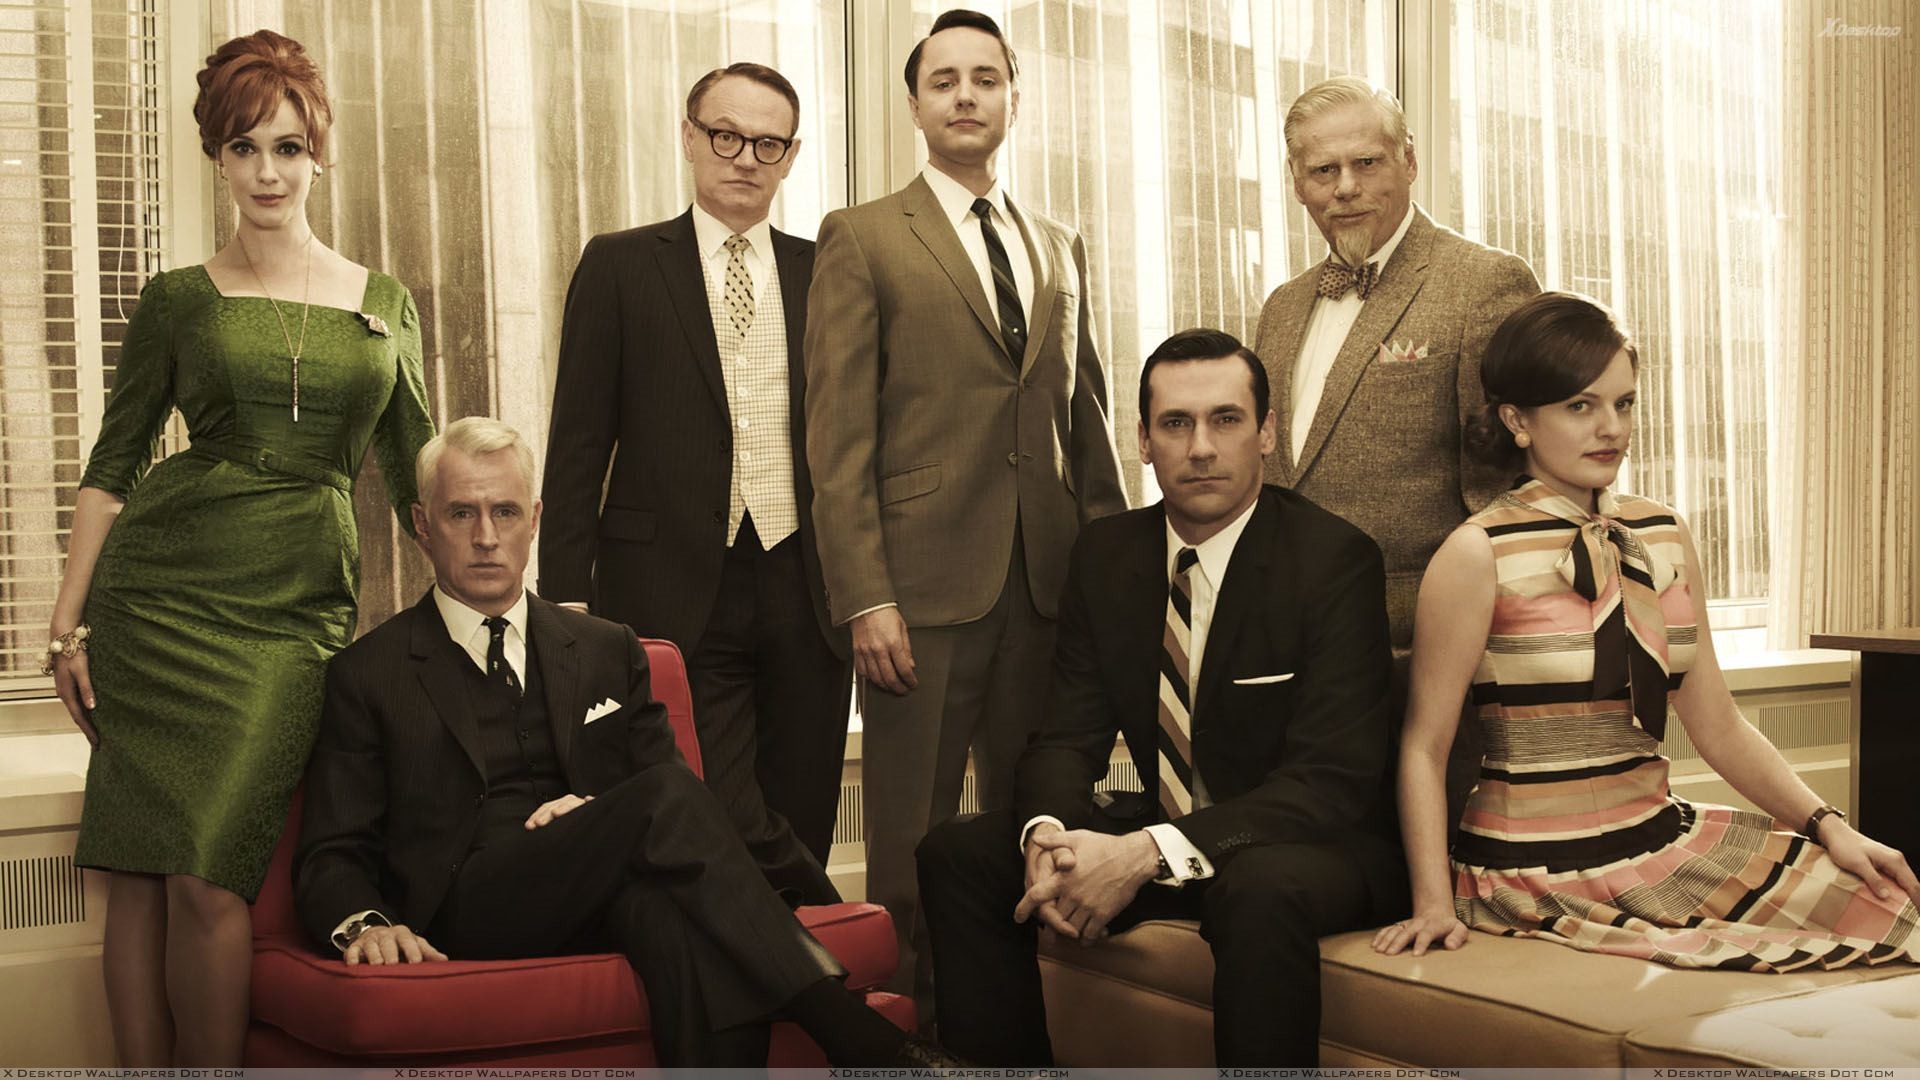 1920x1080 You are viewing wallpaper titled "Mad Men ...